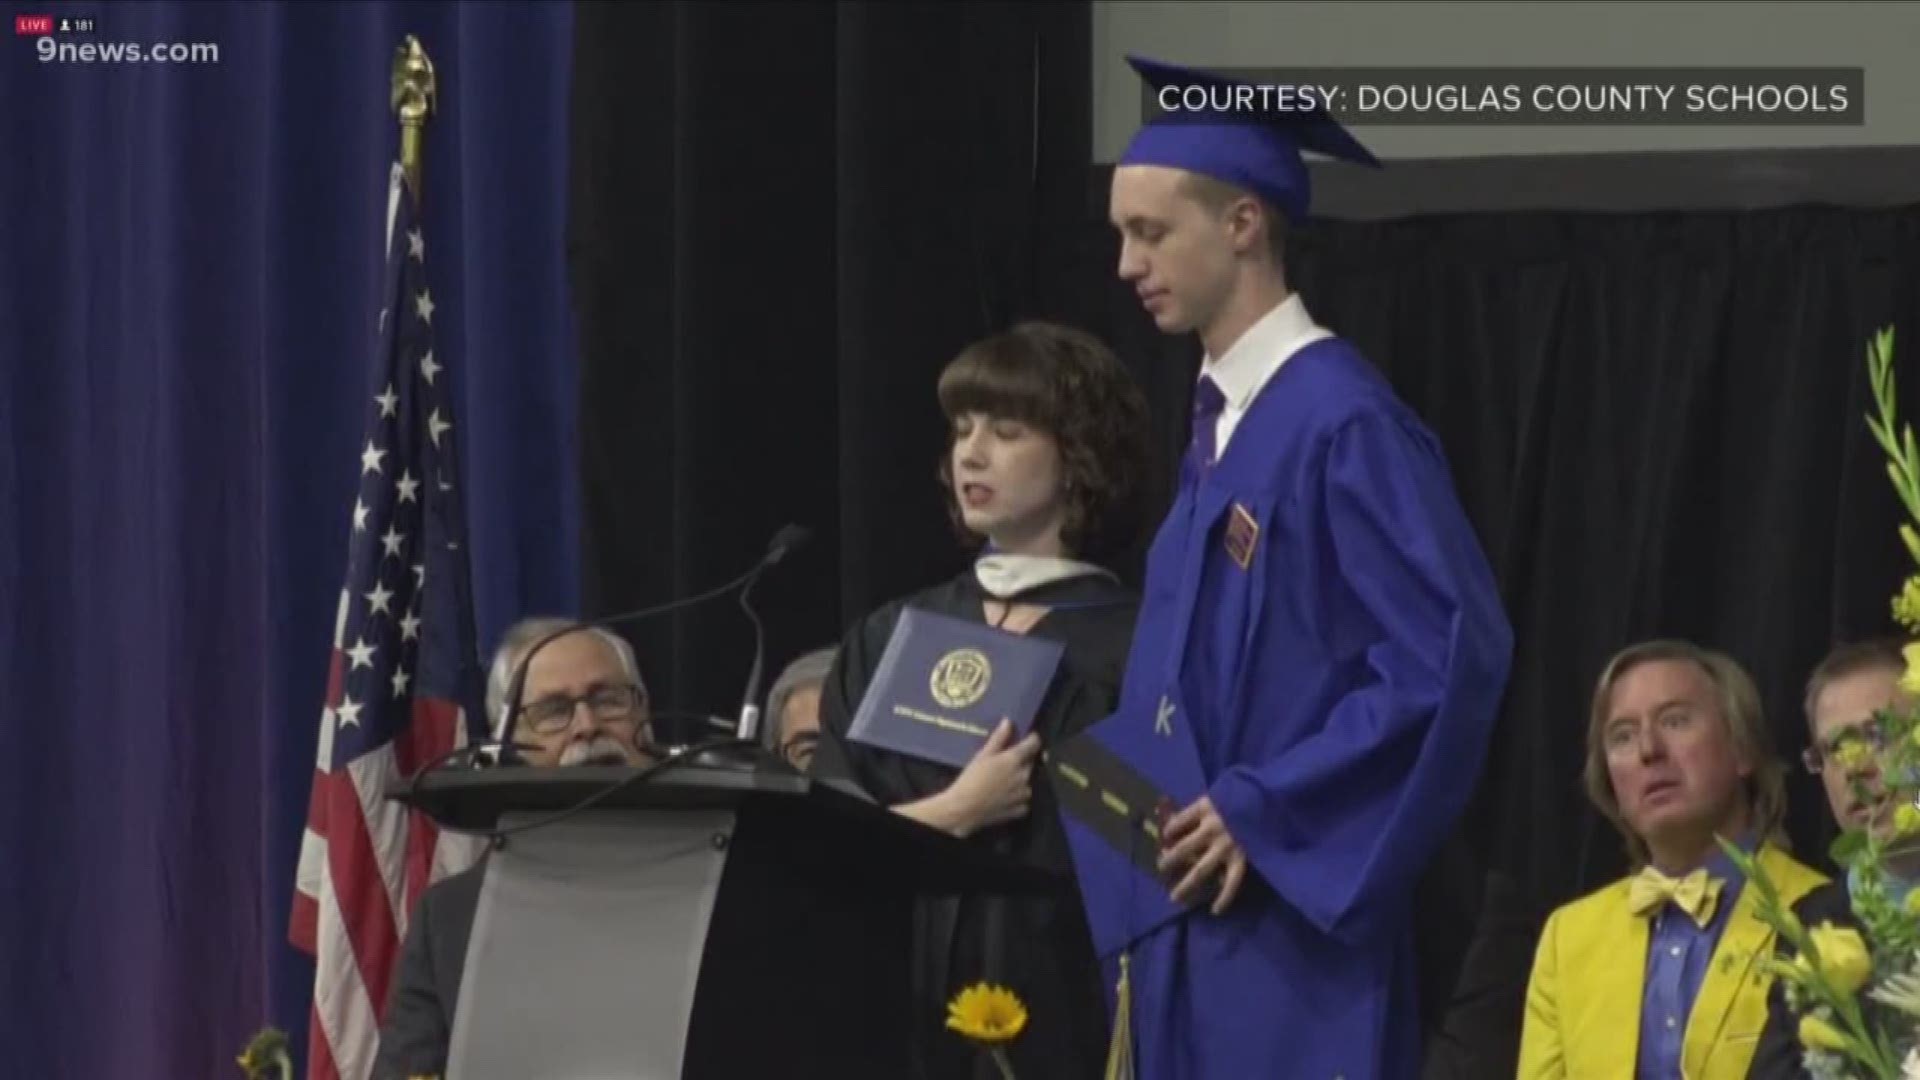 Kendrick was a strong presence at his school's graduation ceremony. Every student speaker mentioned his kindness and his bravery during the school shooting on May 7.